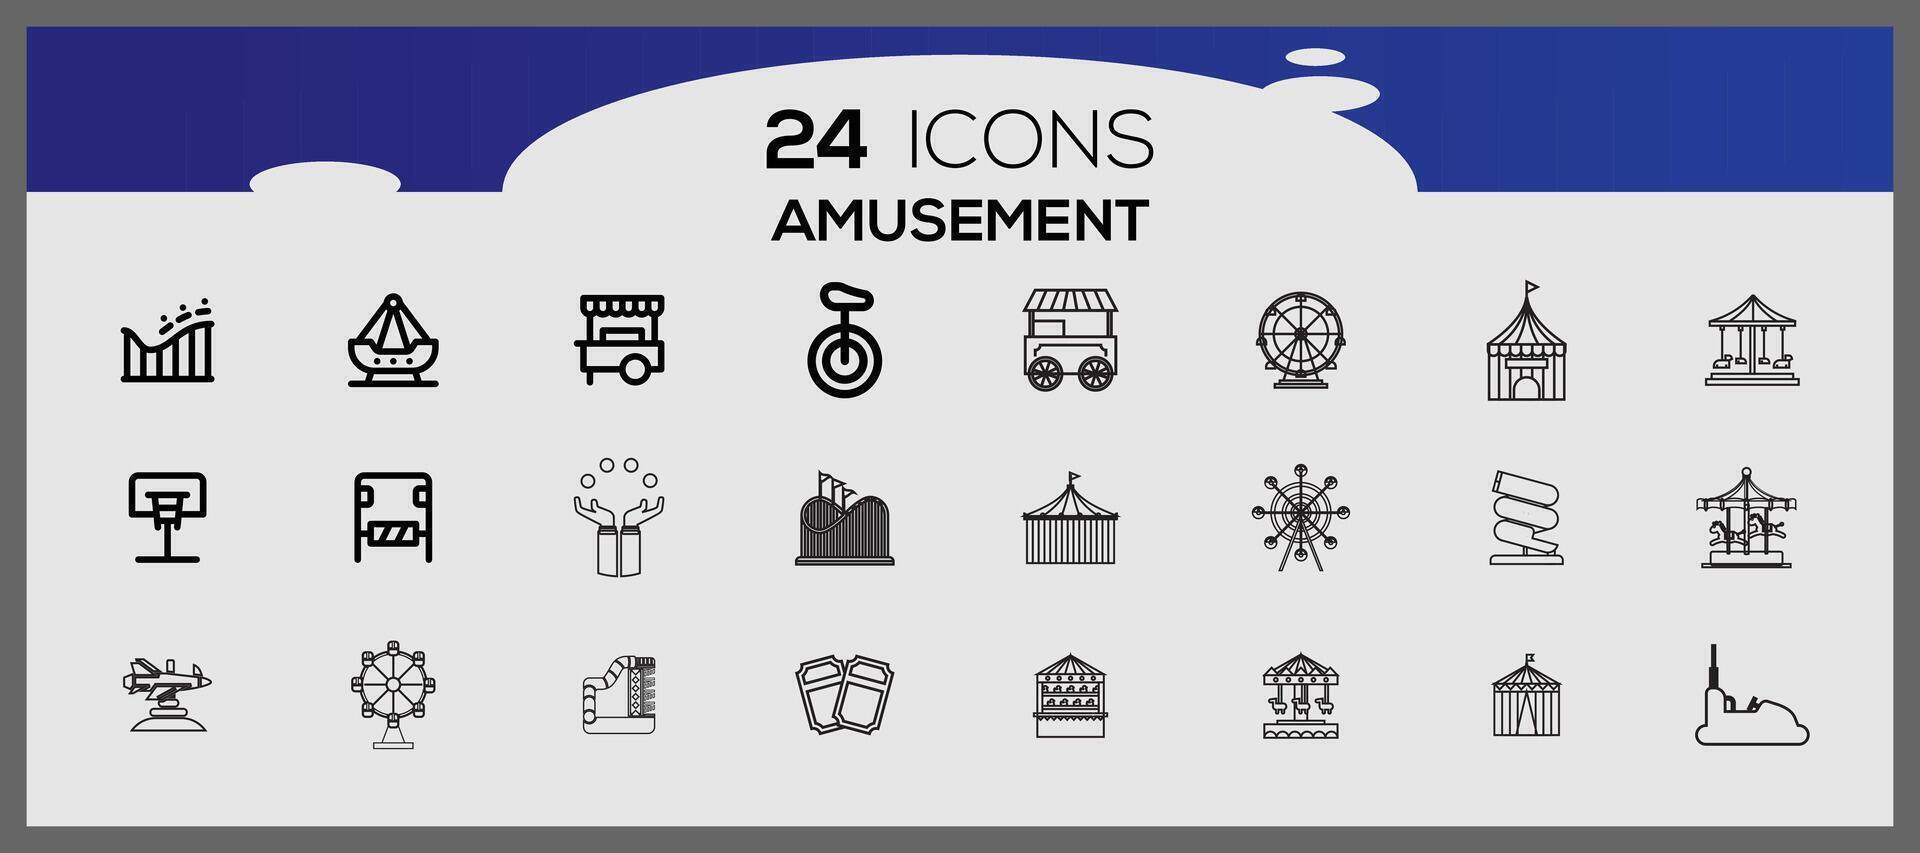 Flat color isolated amusement park icons. Sticker set of amusement park and fun fair objects. vector